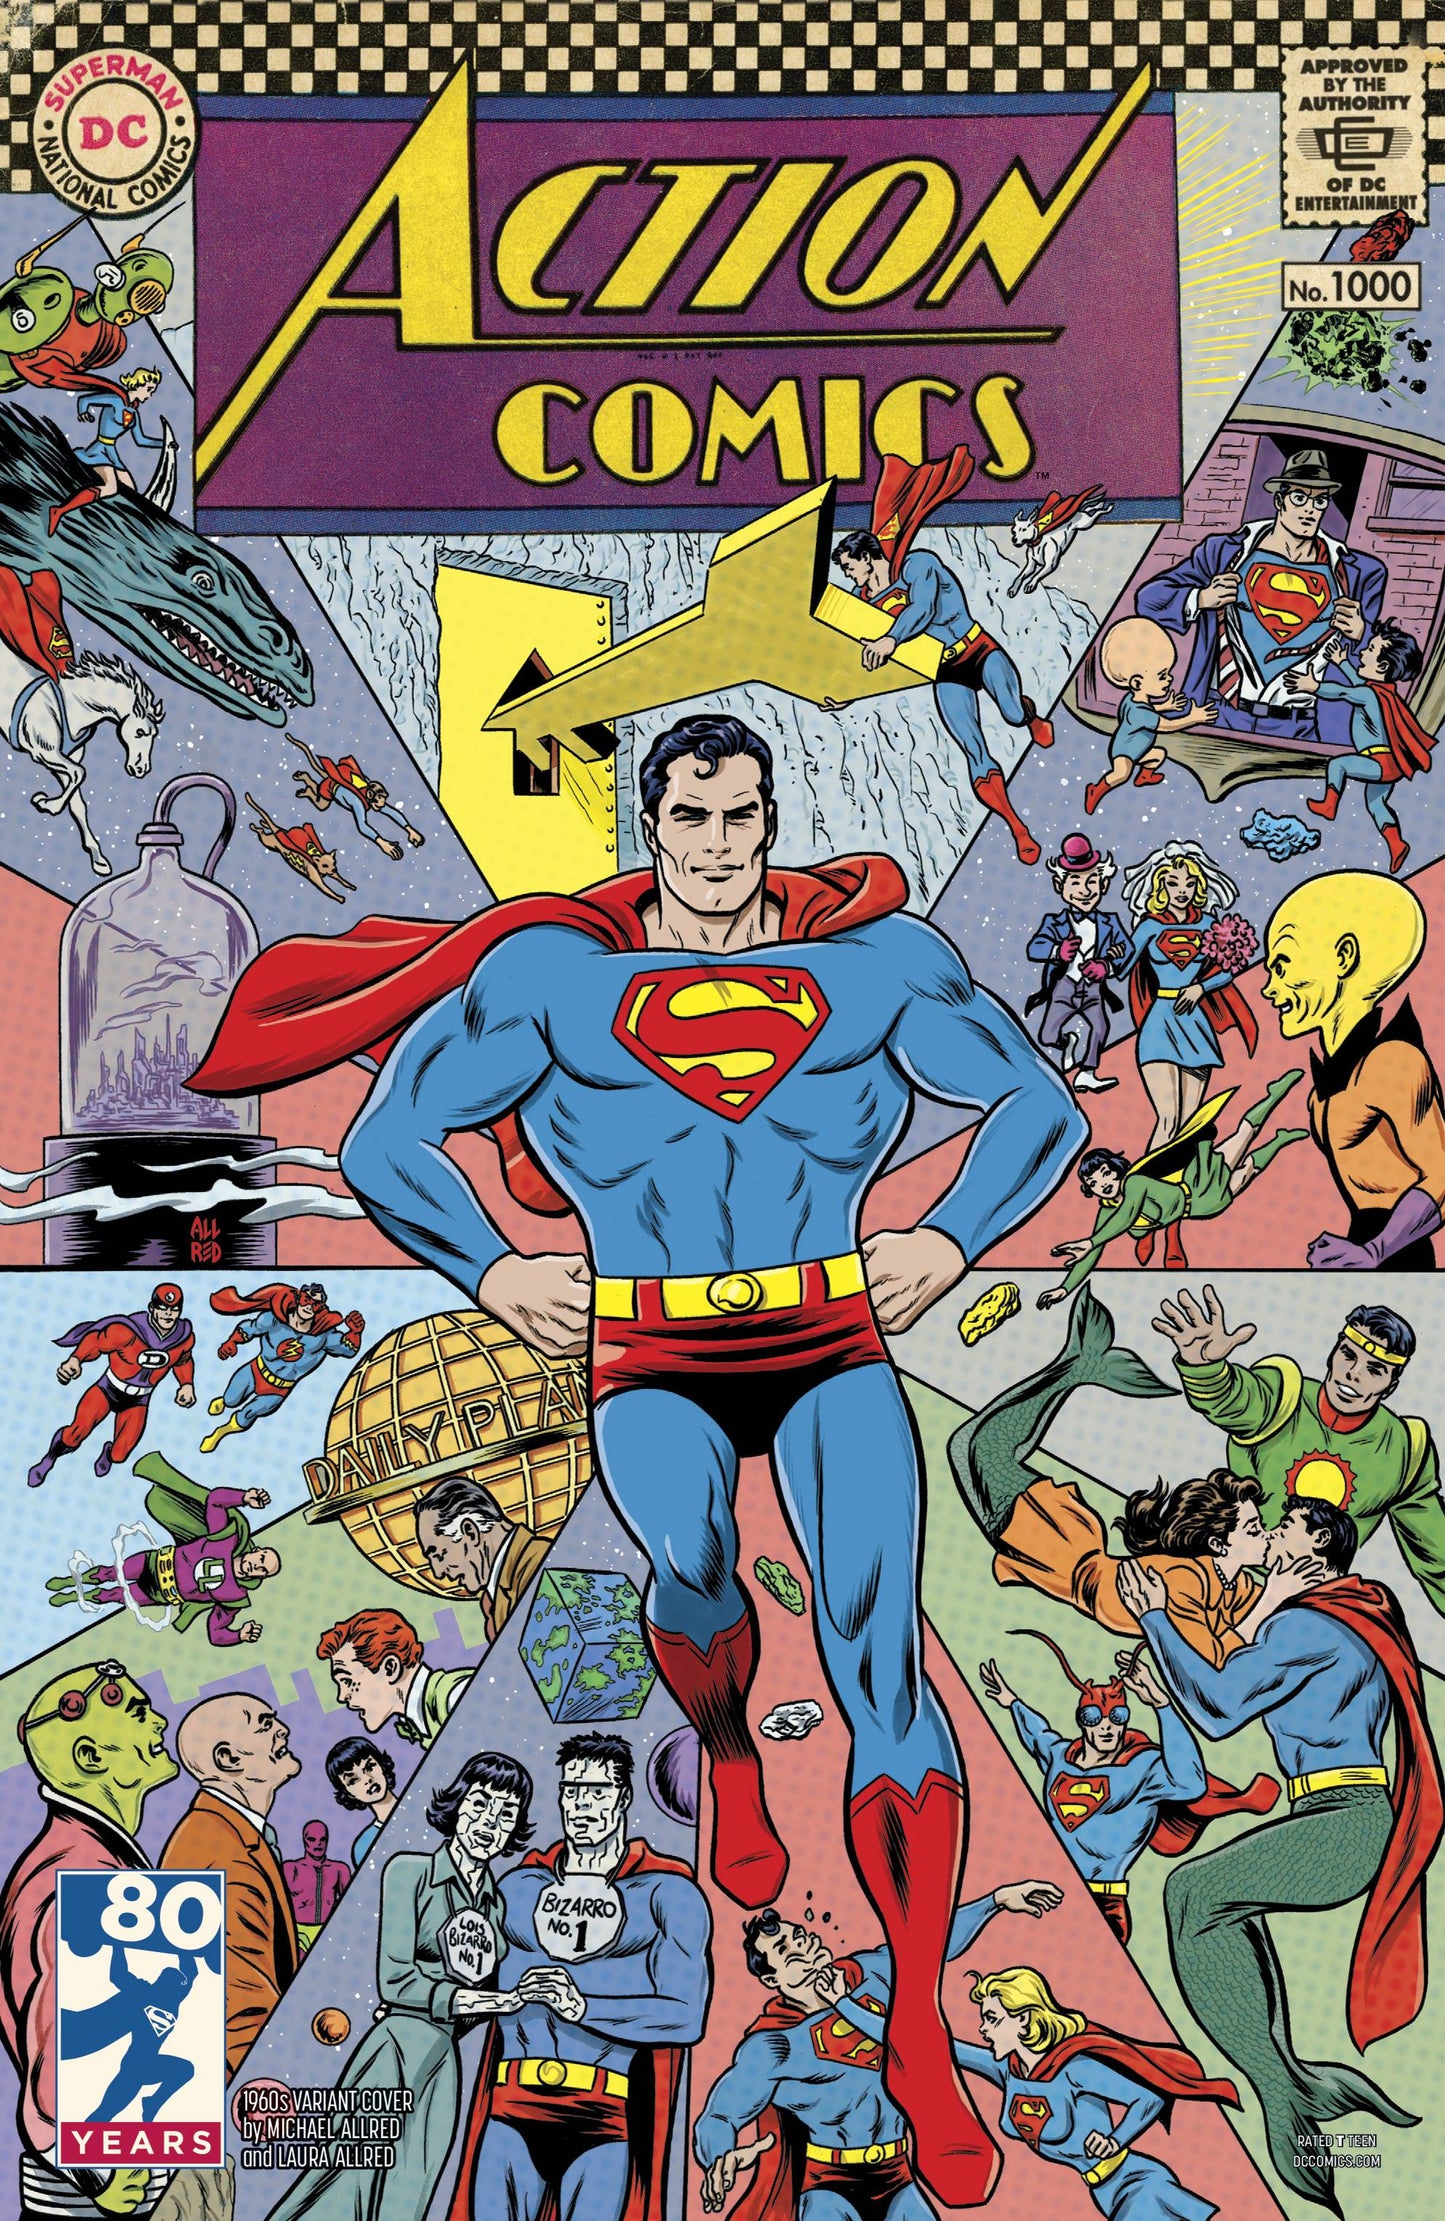 Action Comics #1000 1960's Variant Edition (Allred) [2018]